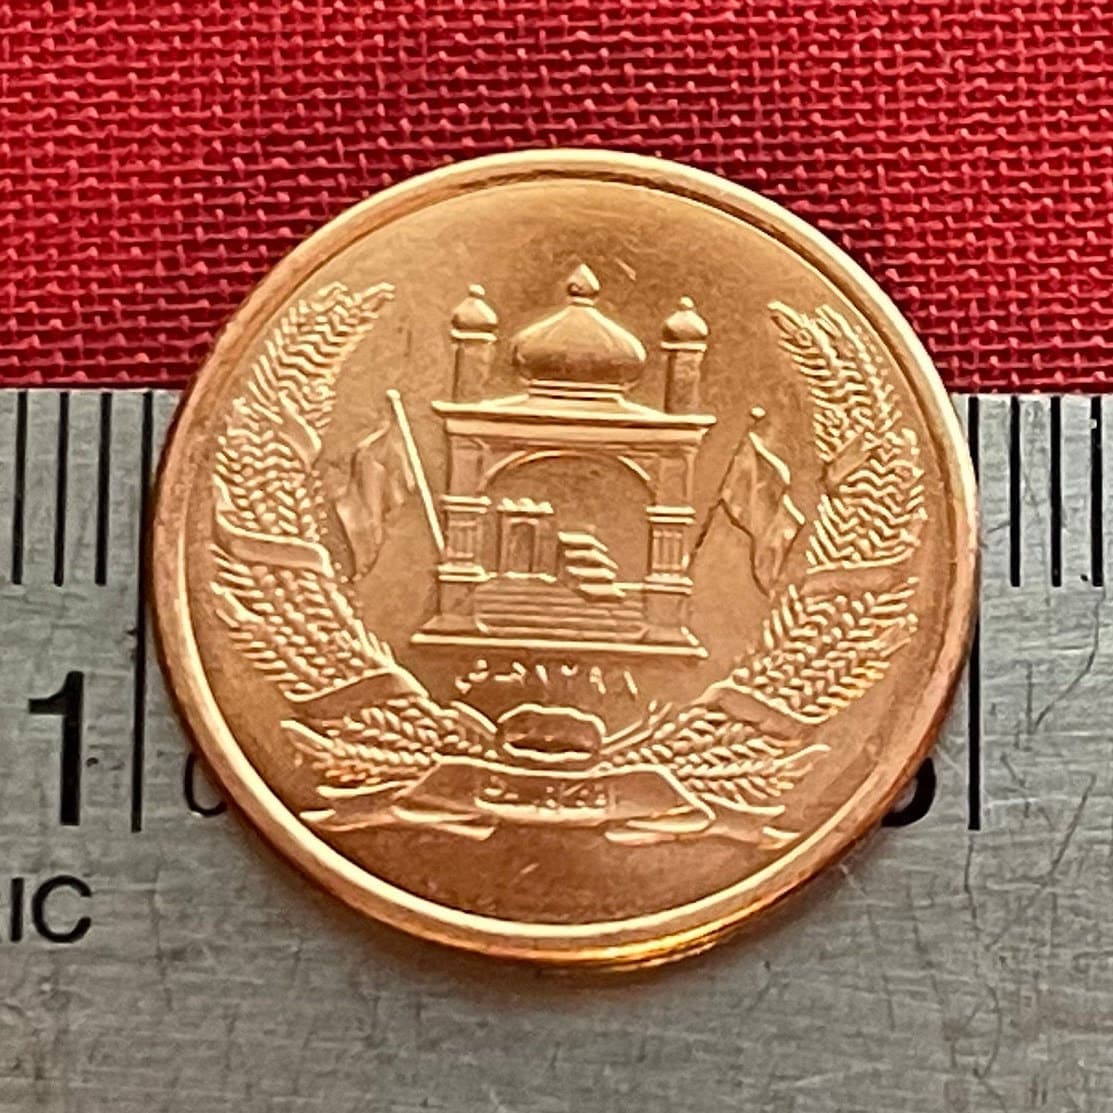 Mosque 1 Afghani Afghanistan Authentic Coin Money for Jewelry and Craft Making